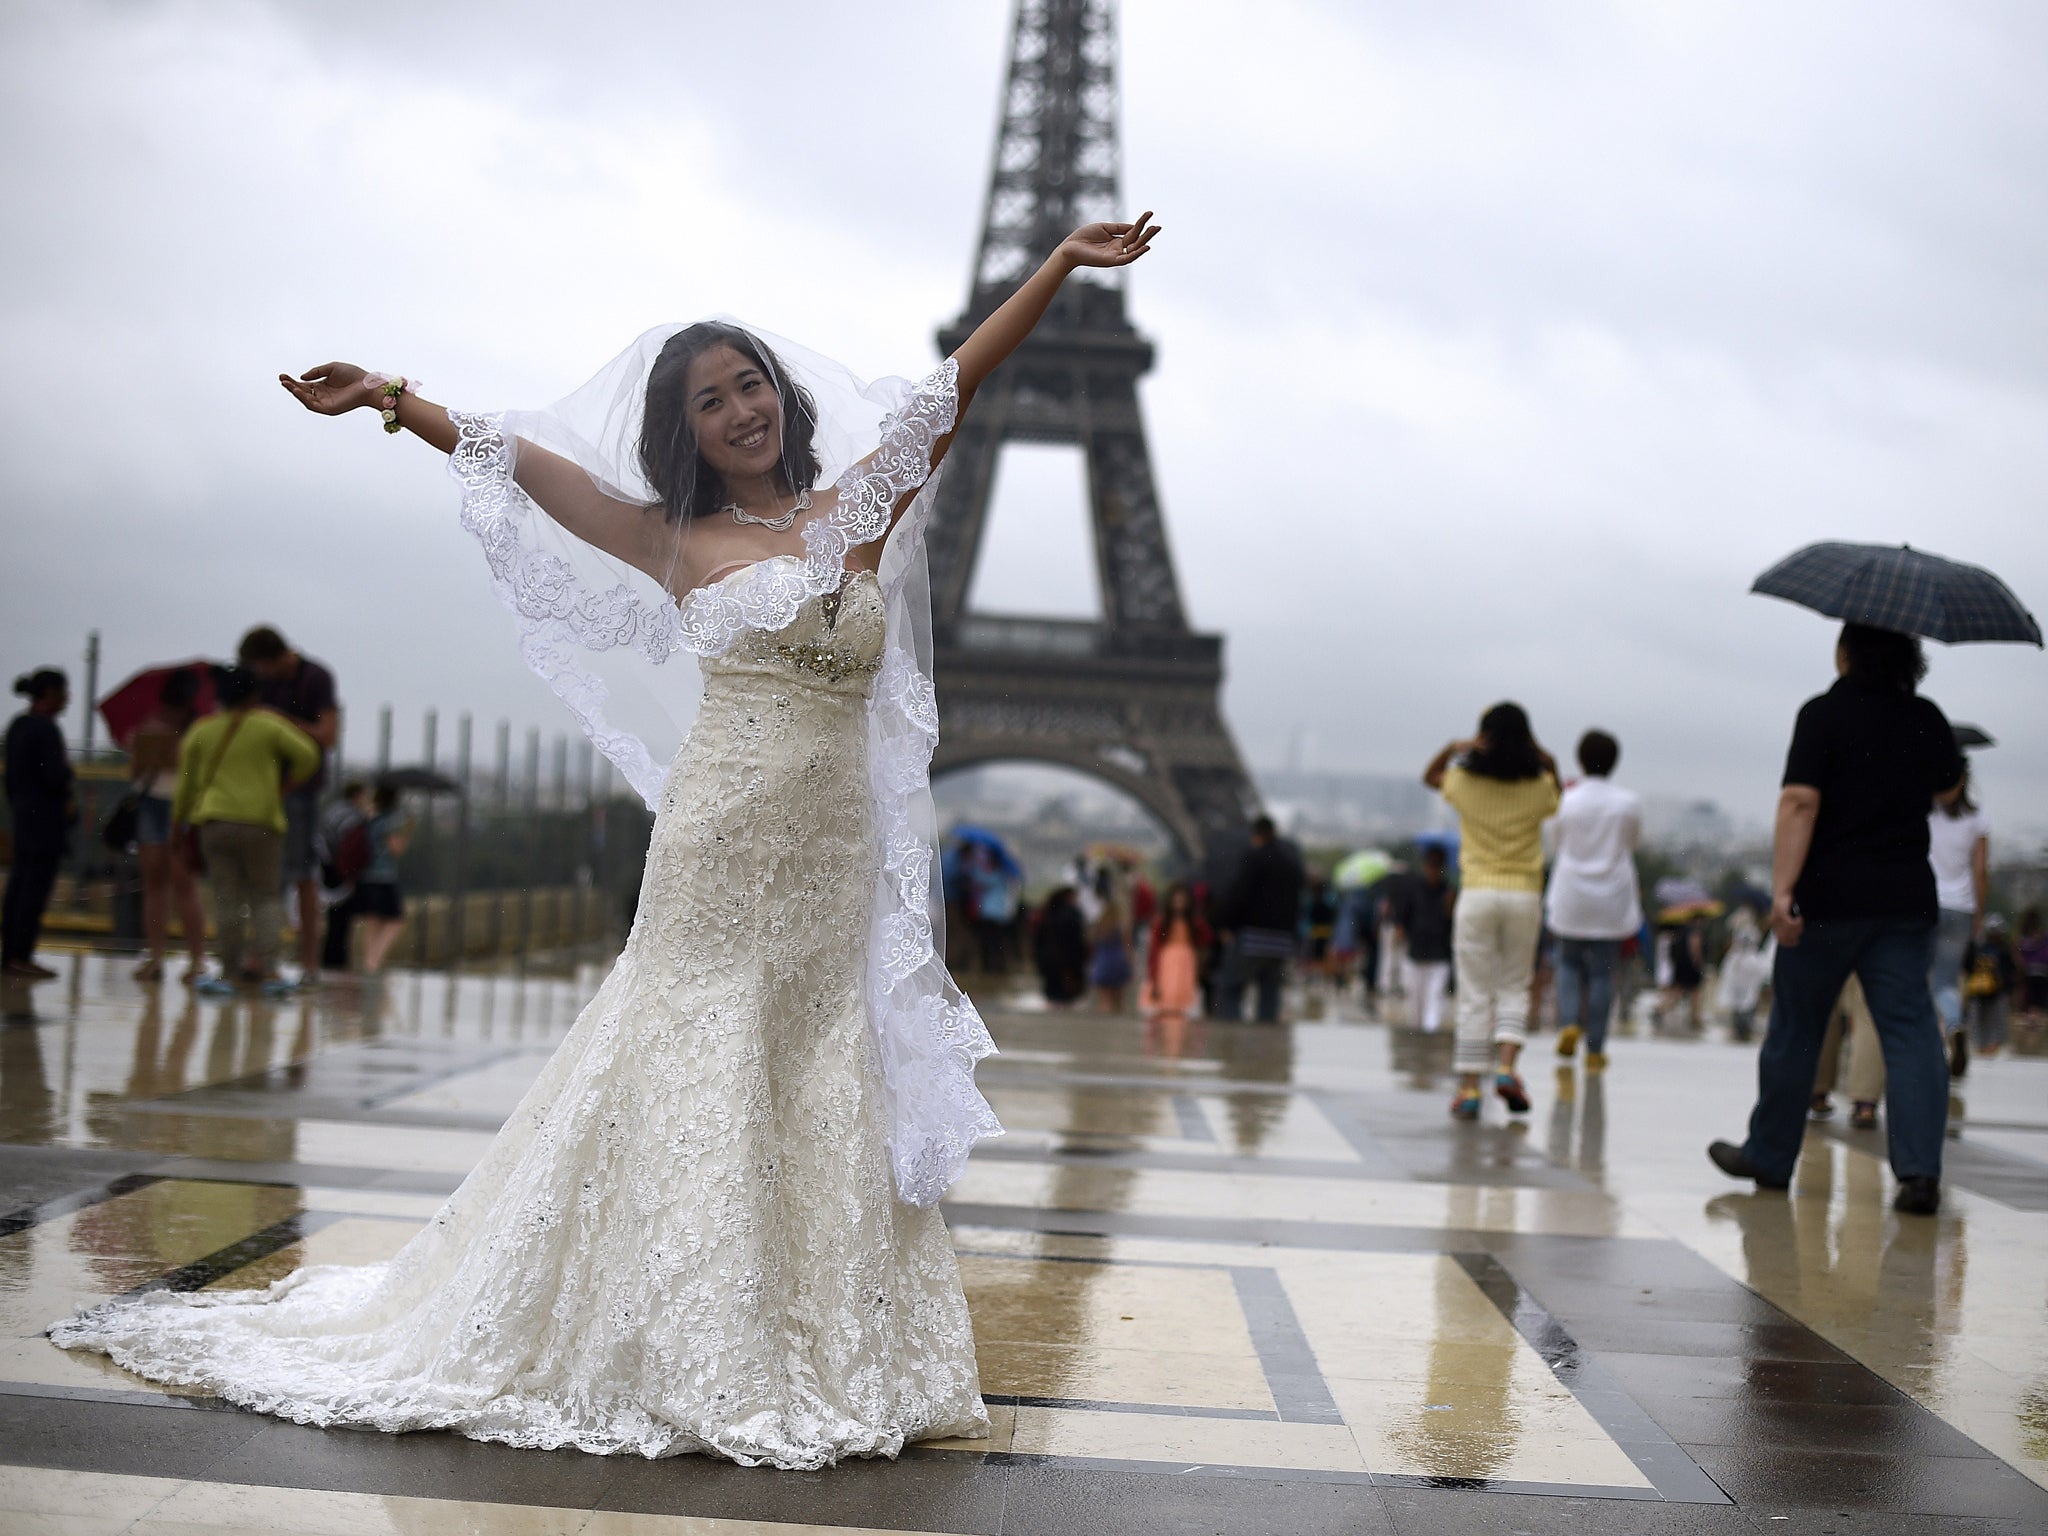 A bride gestures as she poses under the rain on the Trocadero esplanade in front of the Eiffel Tower in Paris on August 8, 2014